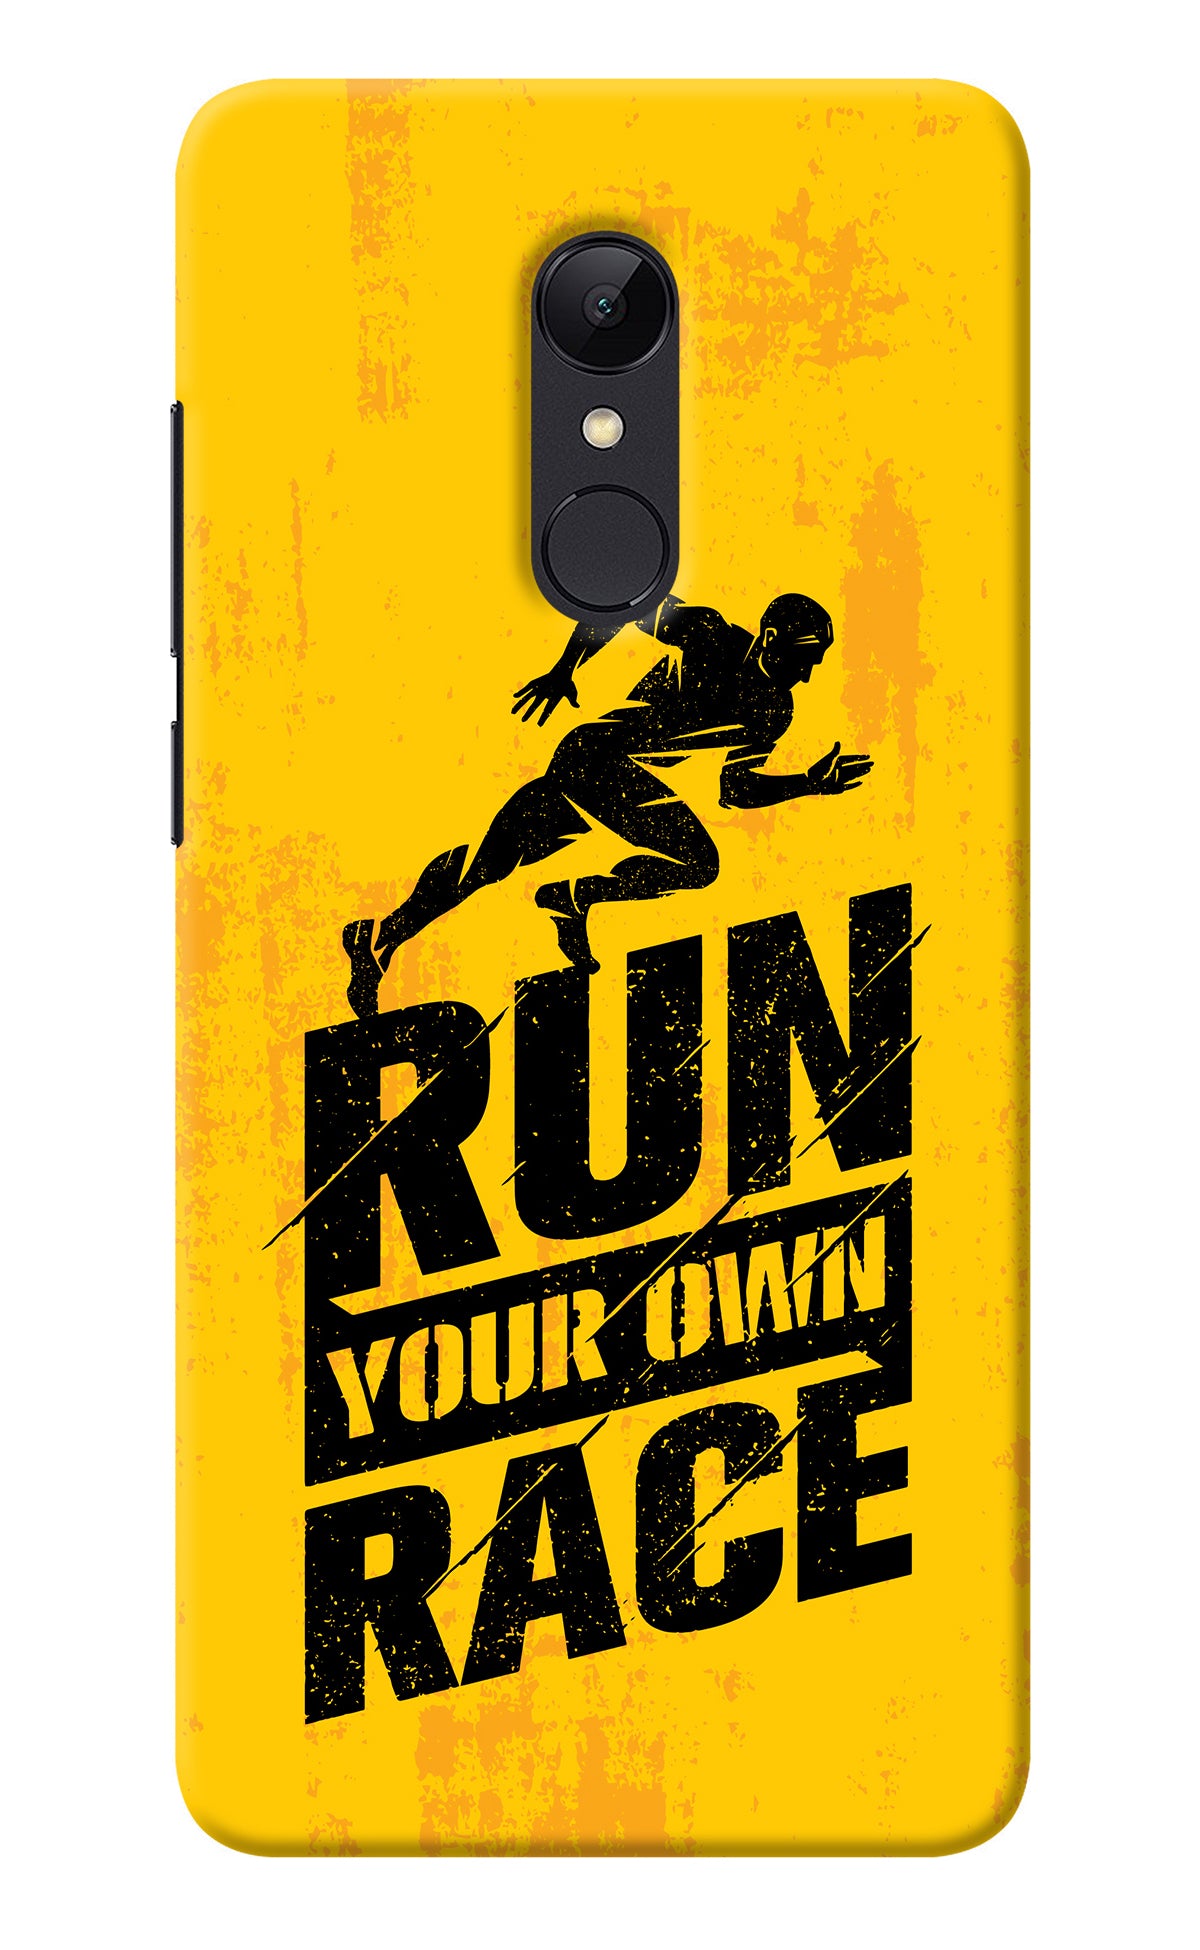 Run Your Own Race Redmi 5 Back Cover